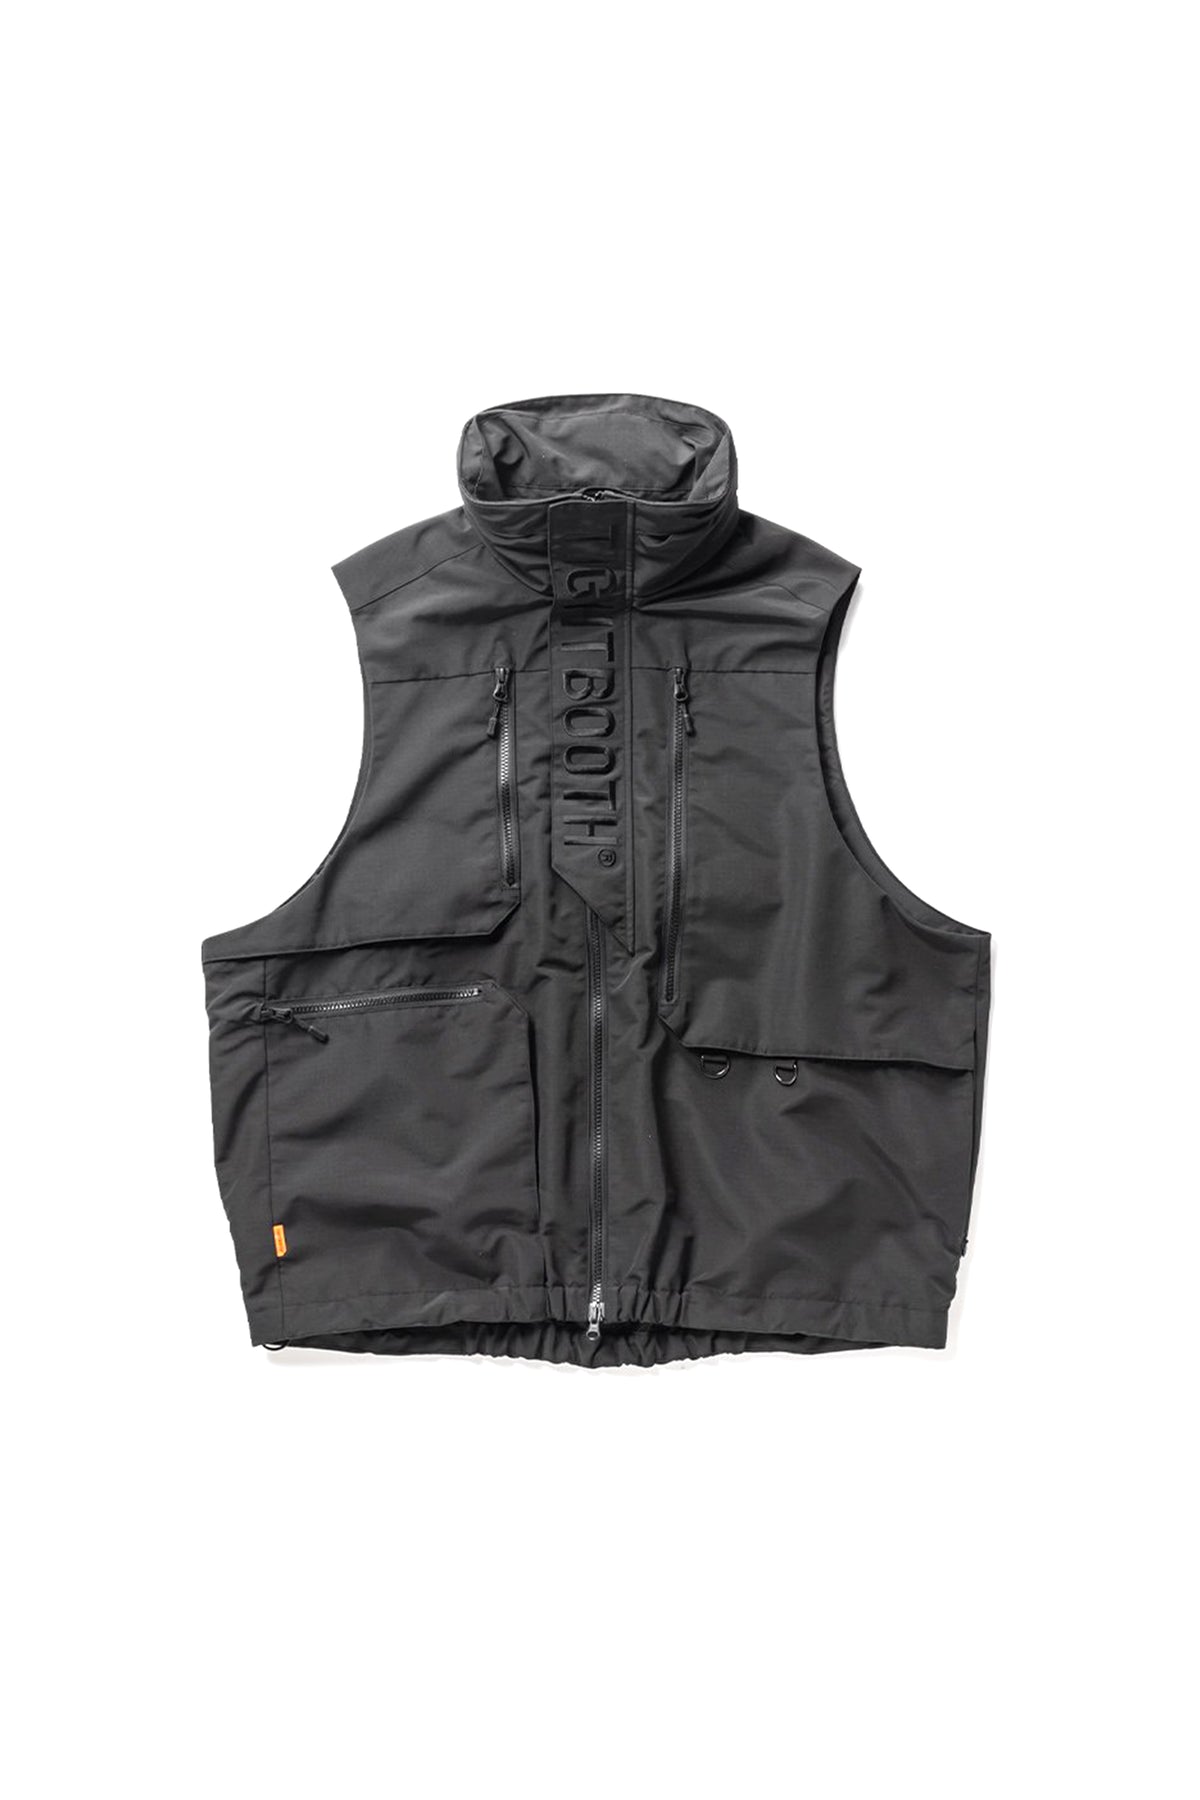 RIPSTOP TACT ICAL VEST / BLK